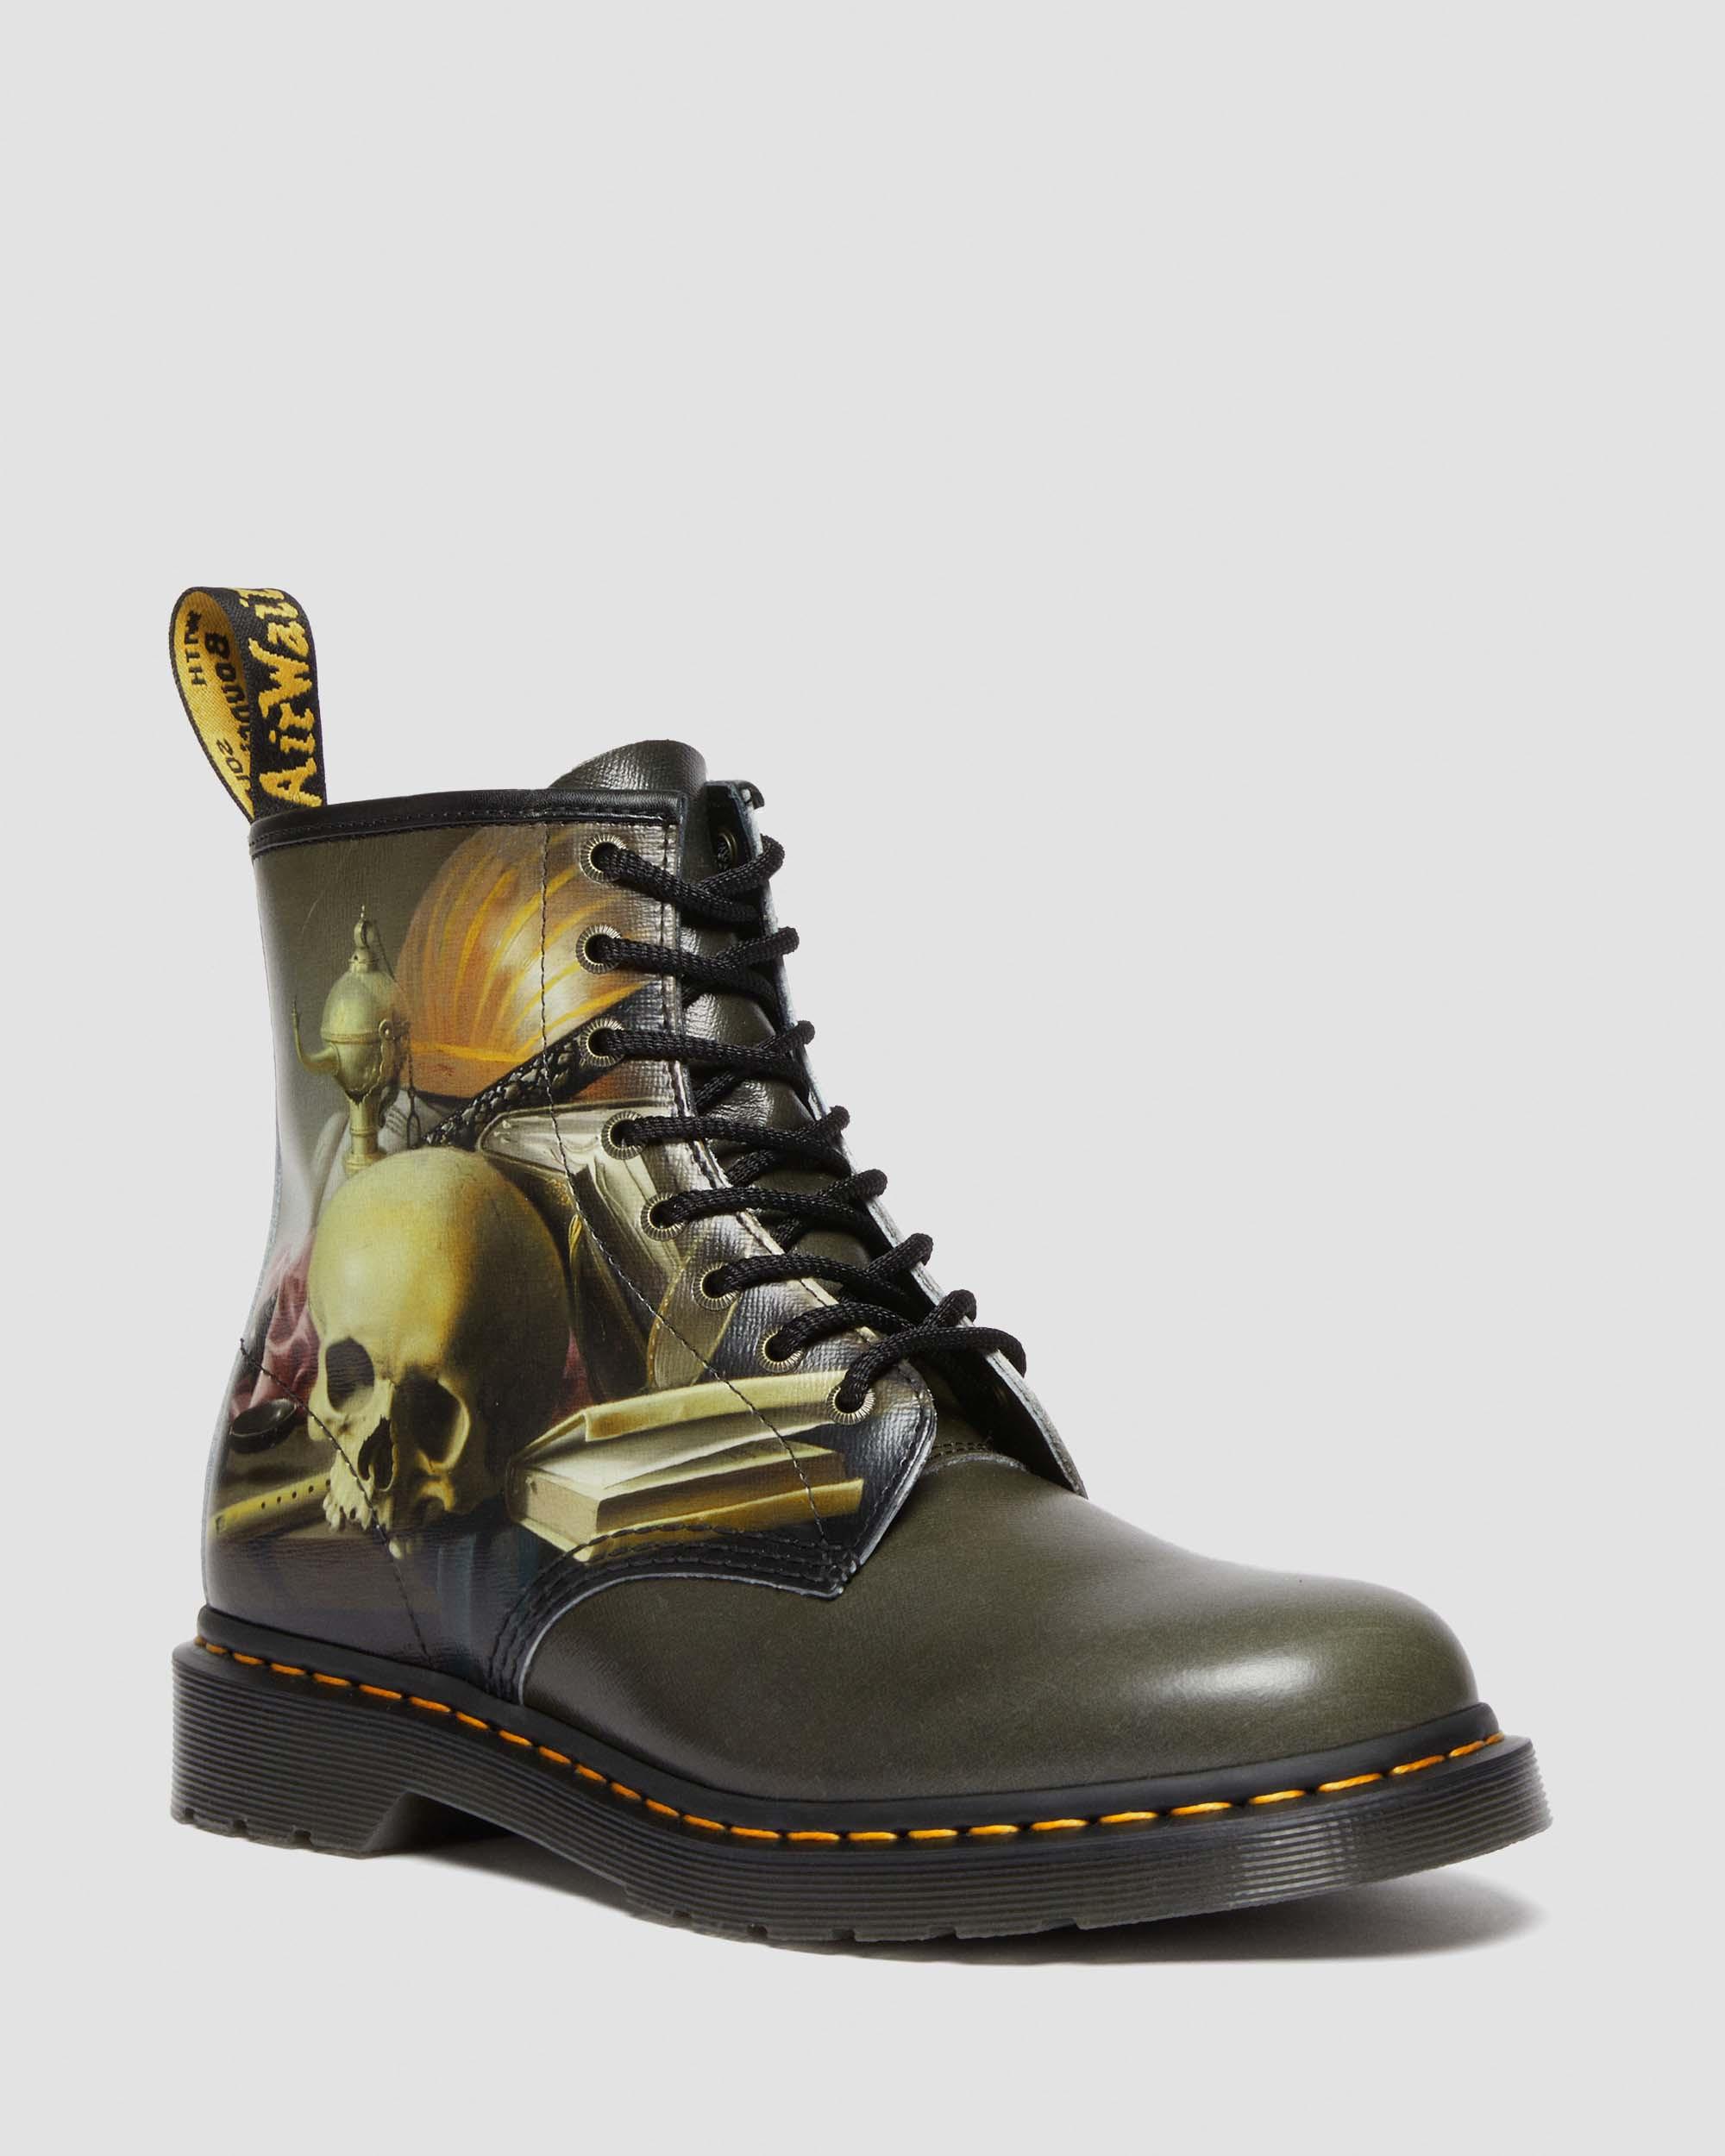 THE NATIONAL GALLERY 1460 HARMEN STEENWYCK LEATHER BOOTS in Multi